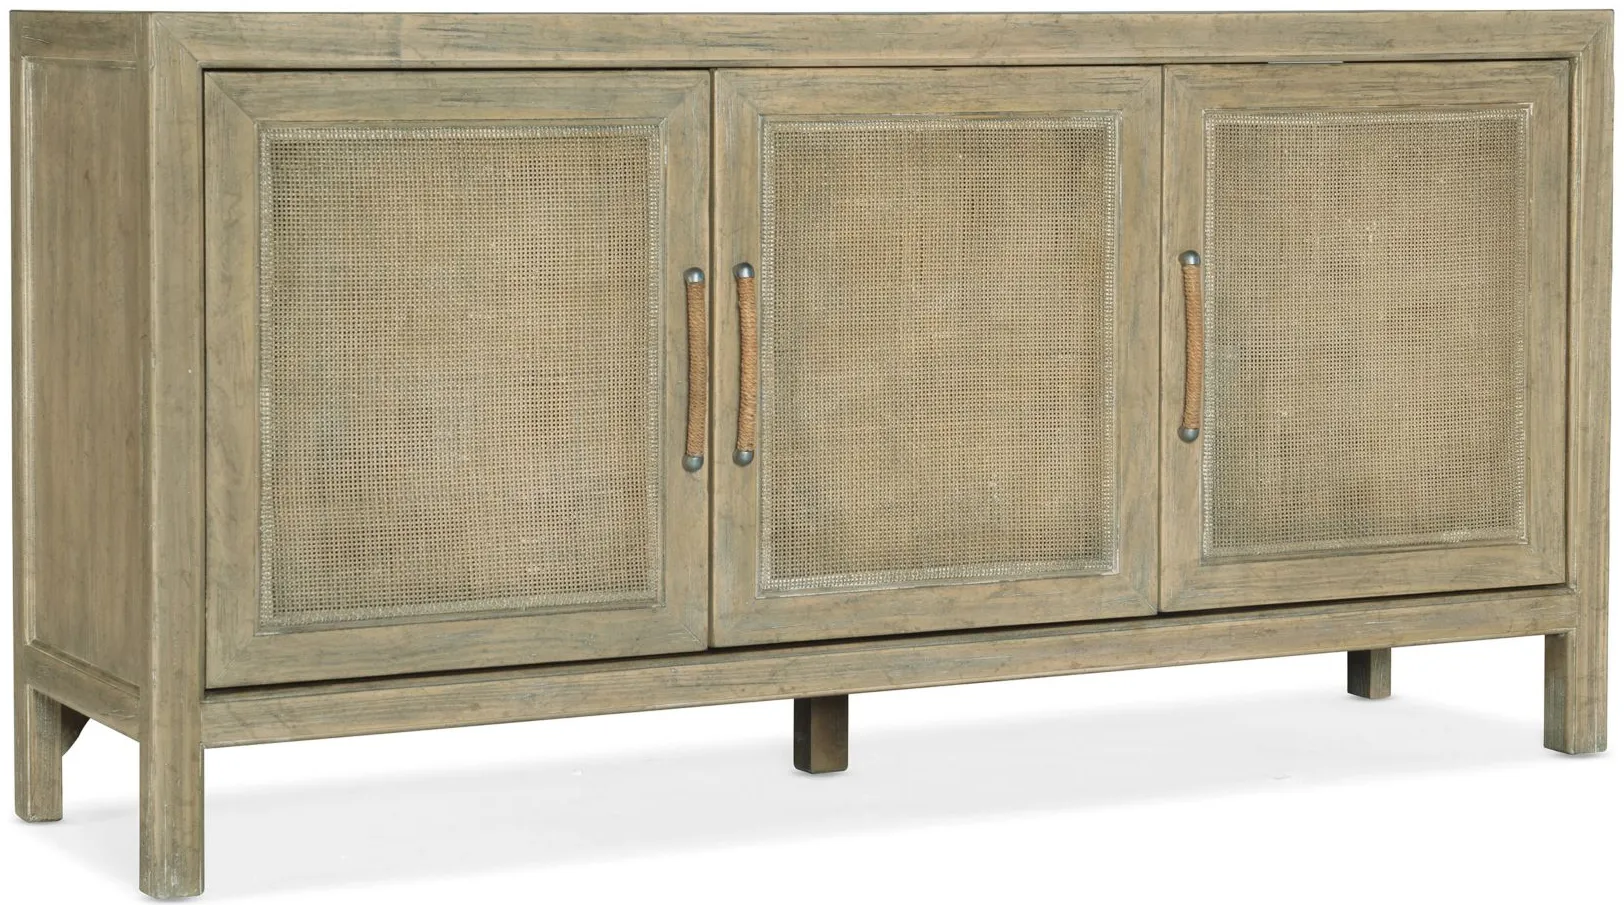 Surfrider Small Media Console in Brown by Hooker Furniture